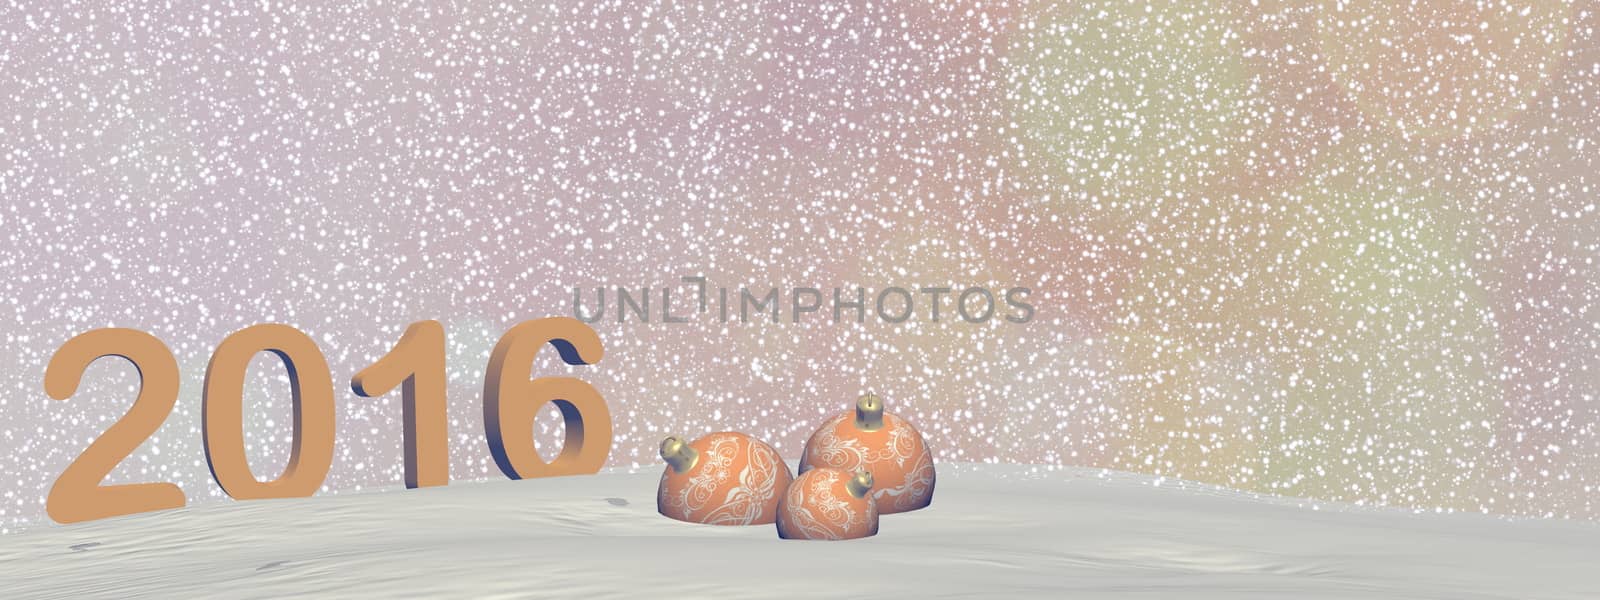 Happy new year 2016 in yellow background with snow - 3D render